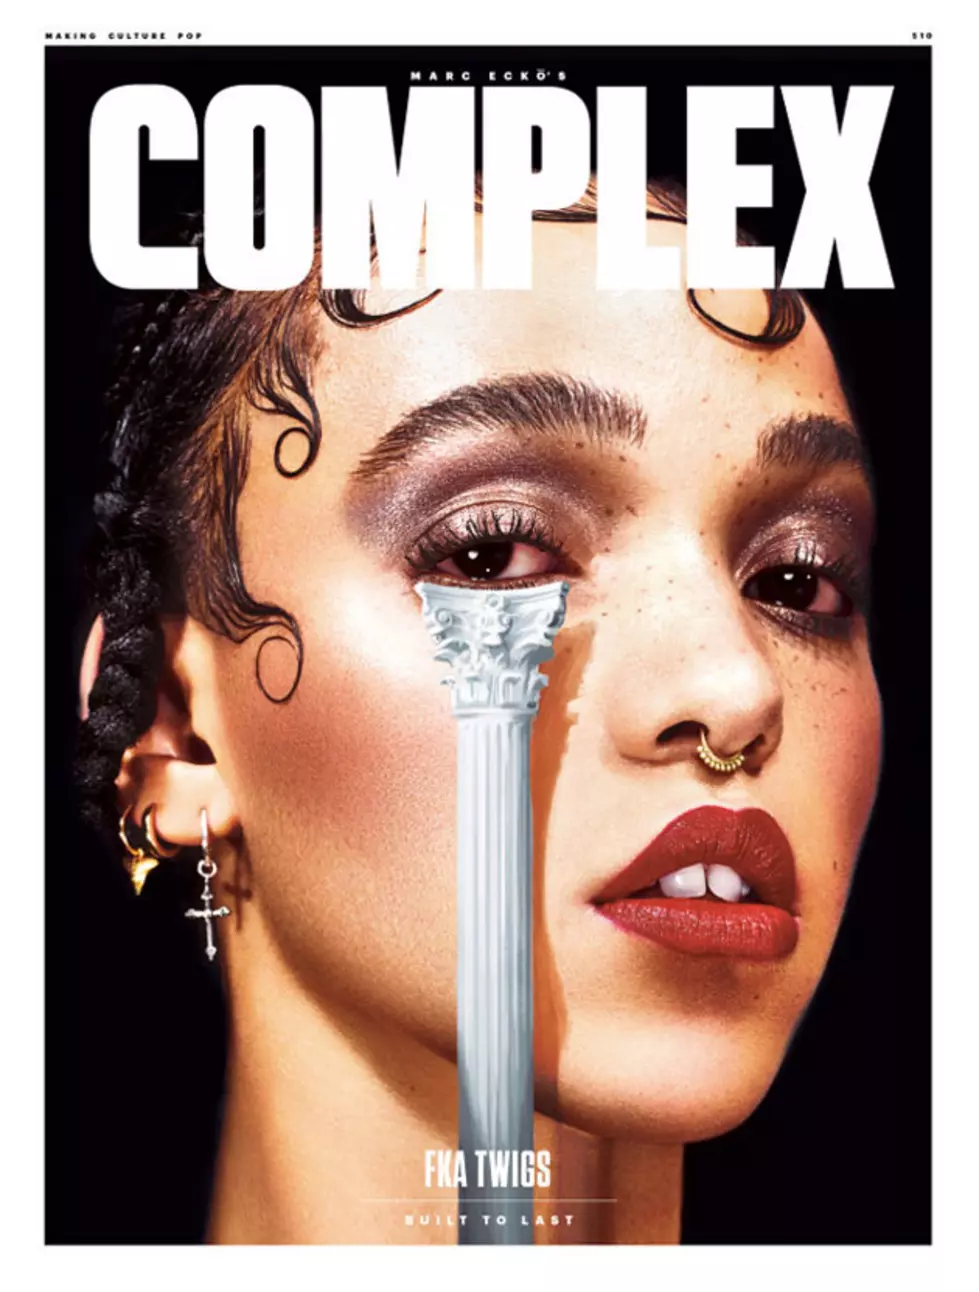 FKA twigs Covers Complex, Talks Robert Pattinson, T-Pain&#8217;s Big Mistake and Her Goofy Side